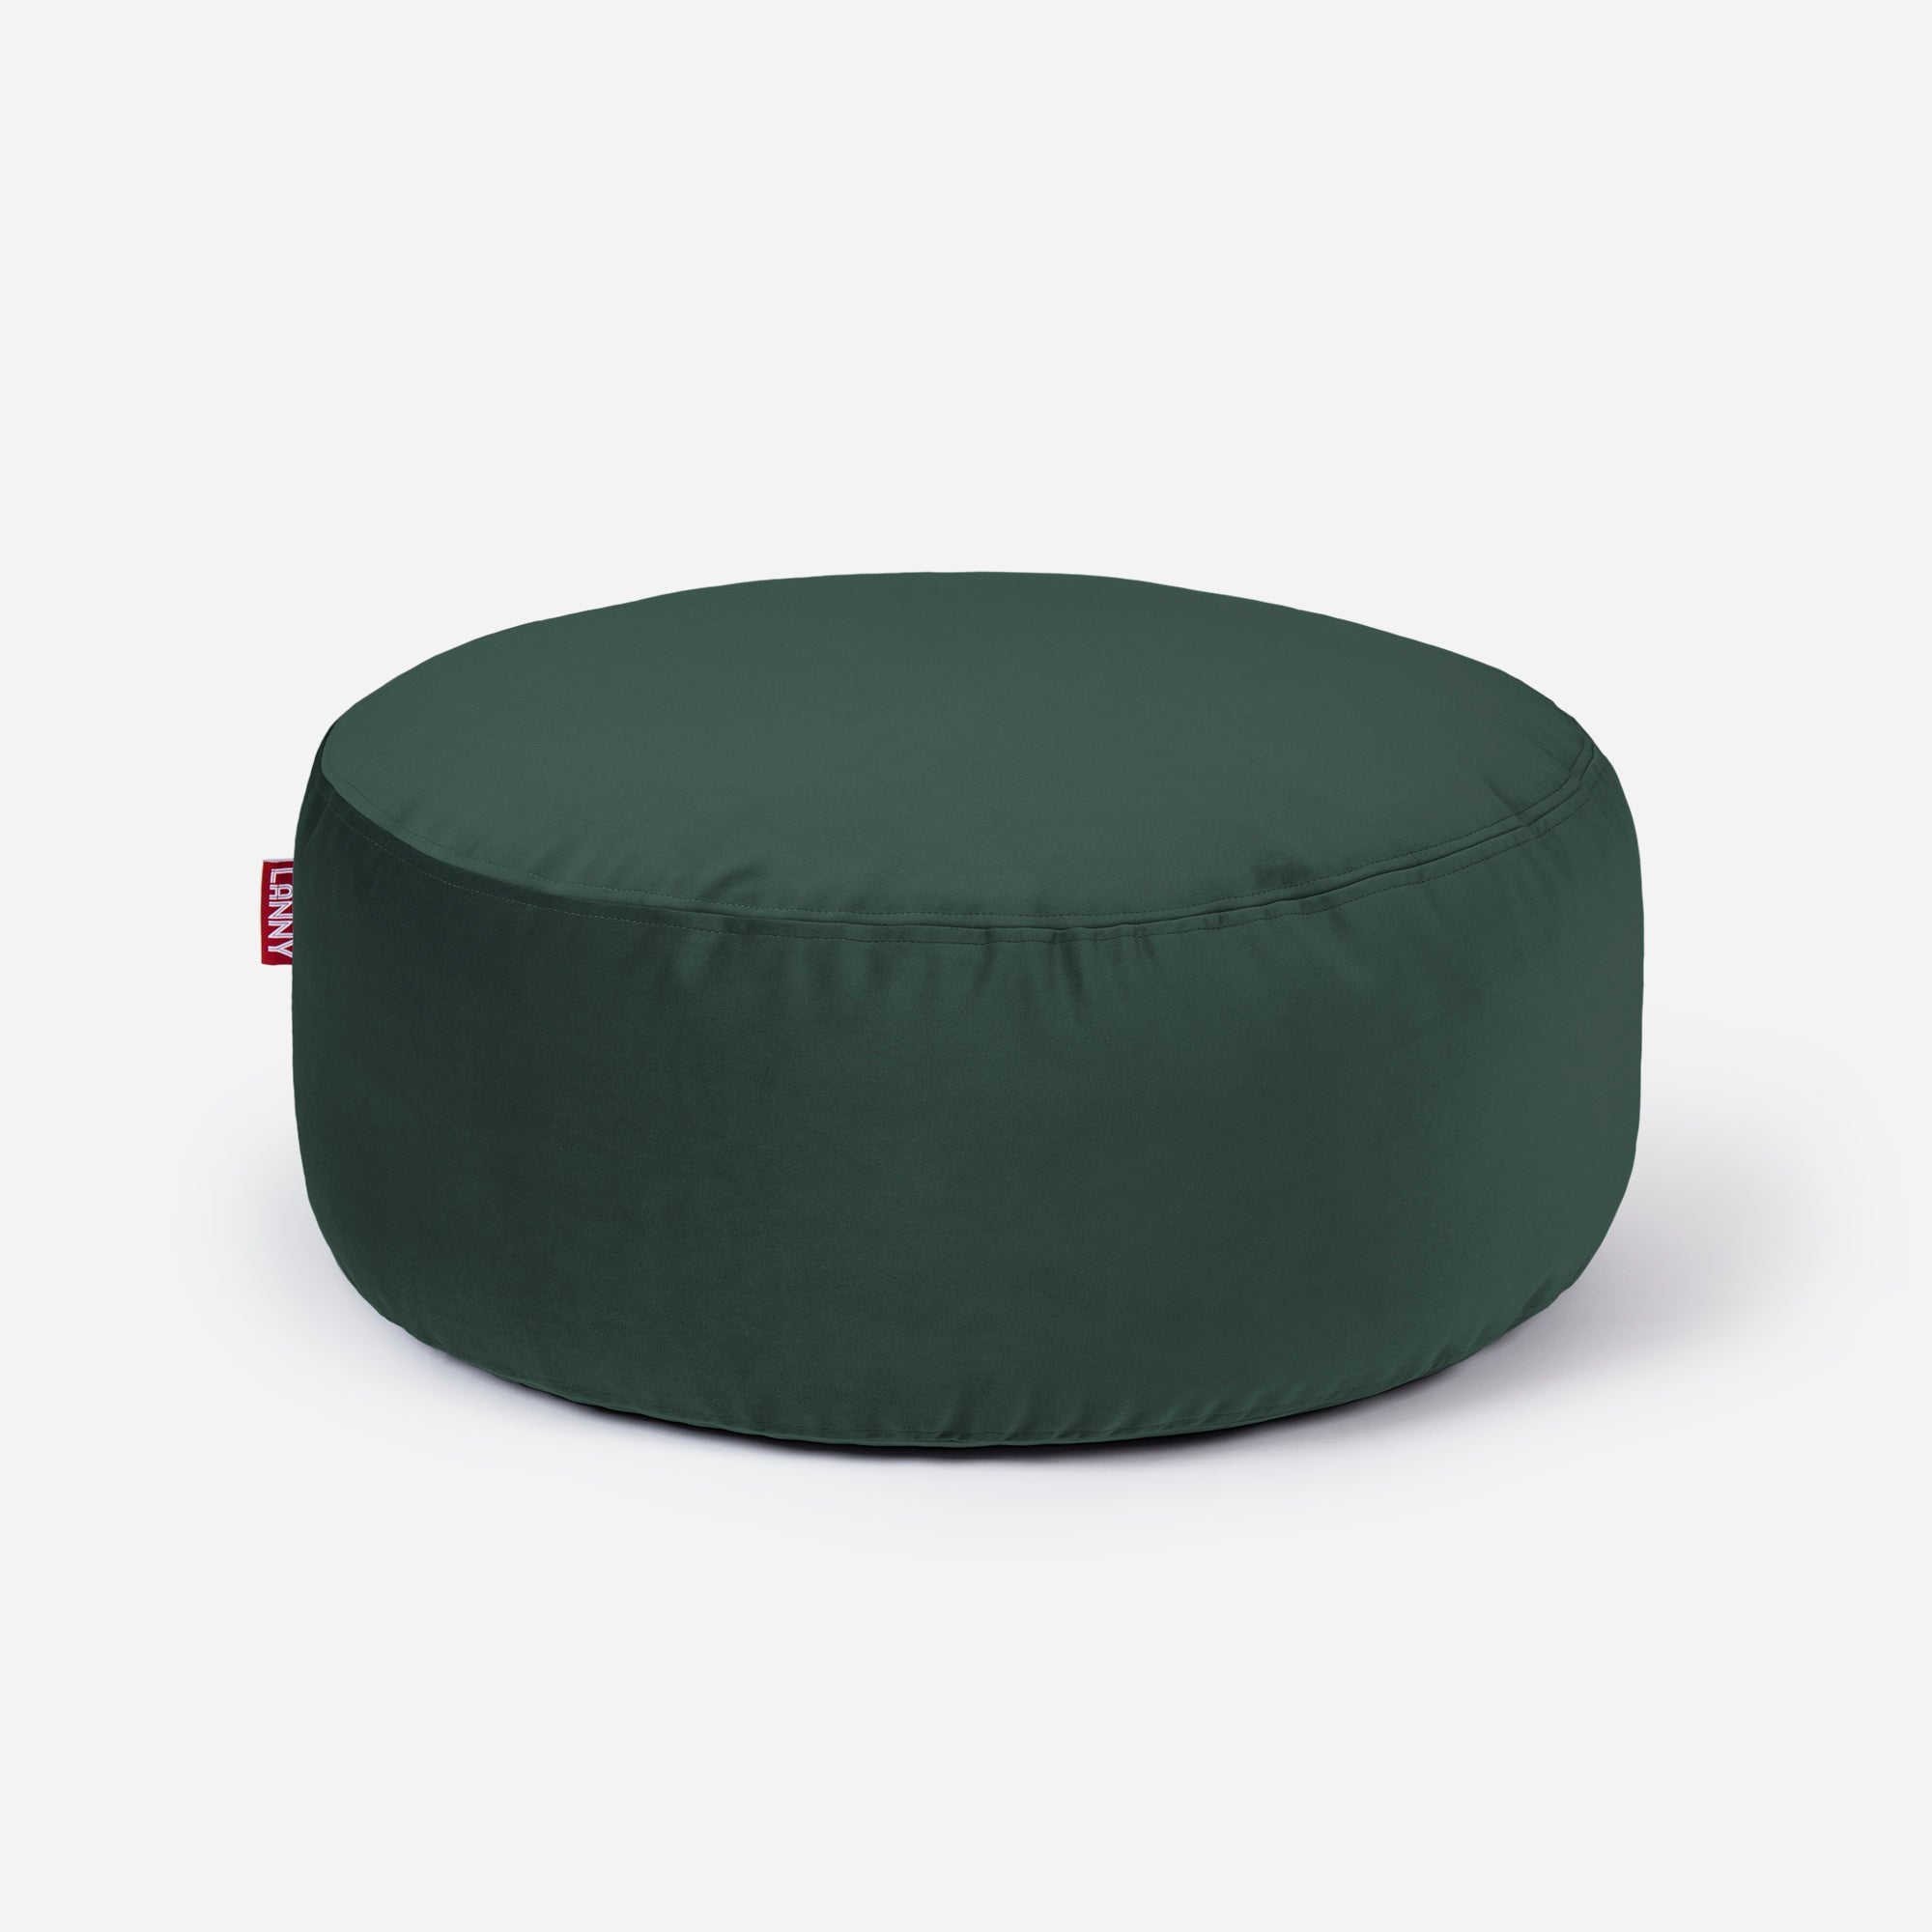 Lanny pouf made from velvet fabric in Green color